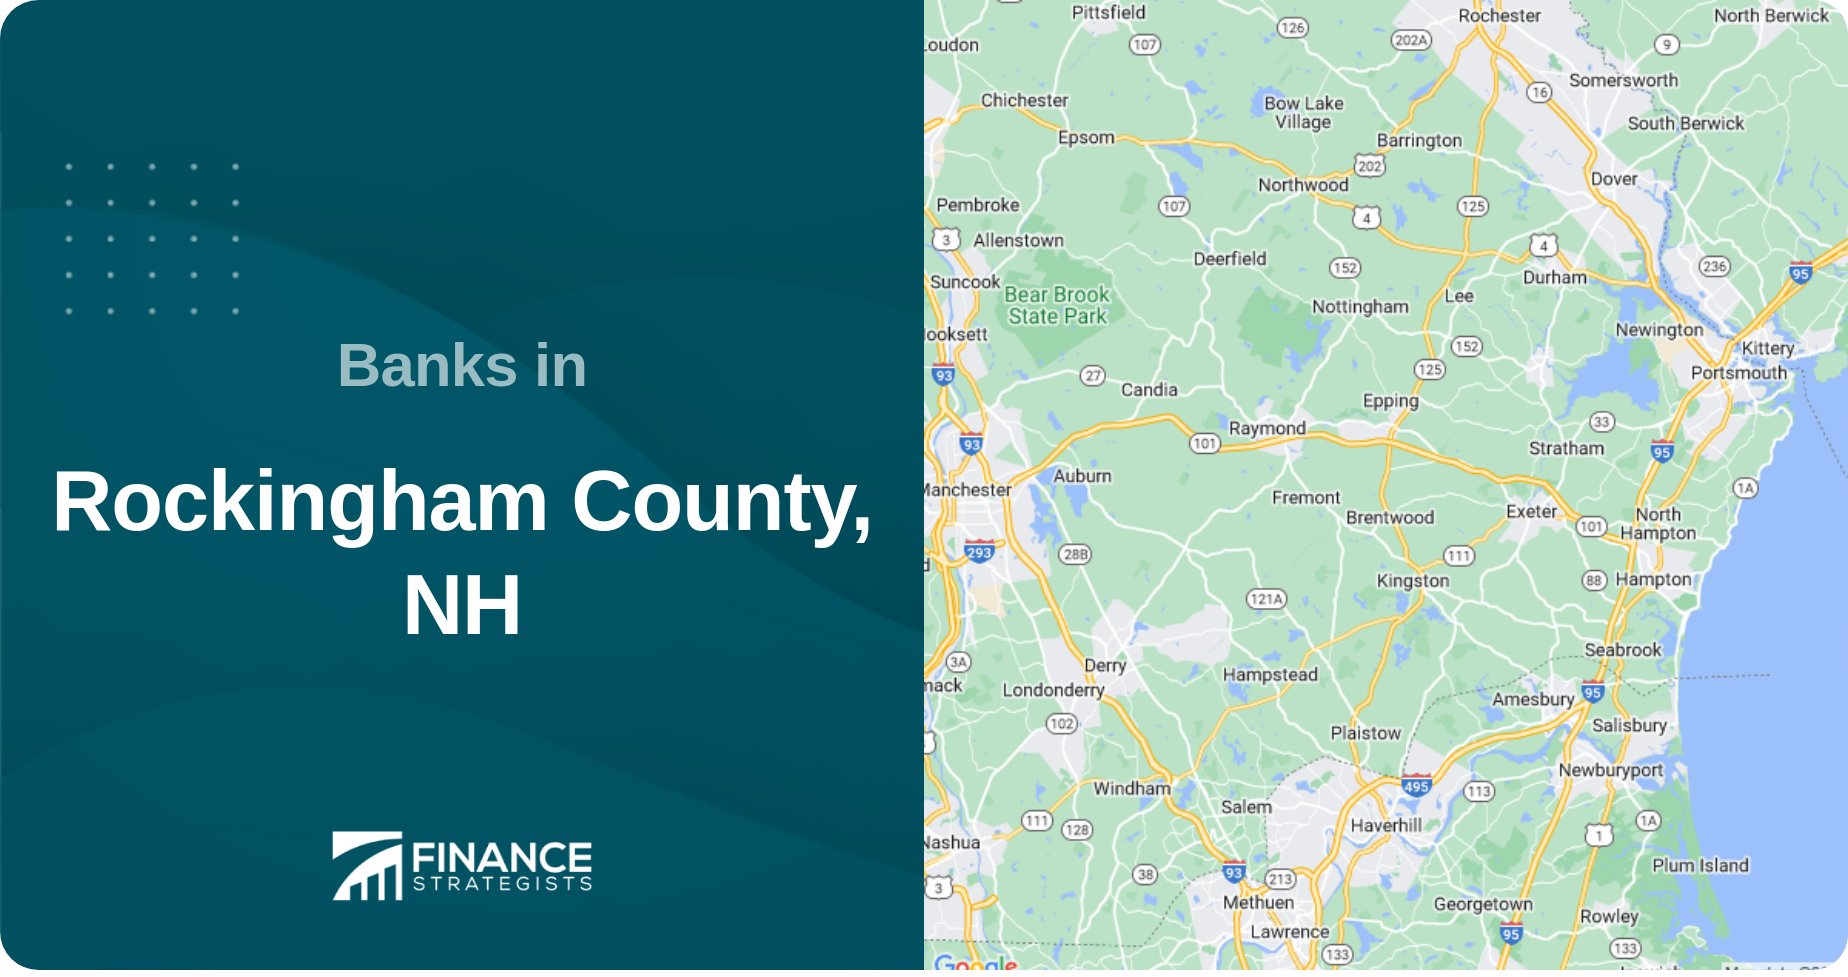 Banks in Rockingham County, NH